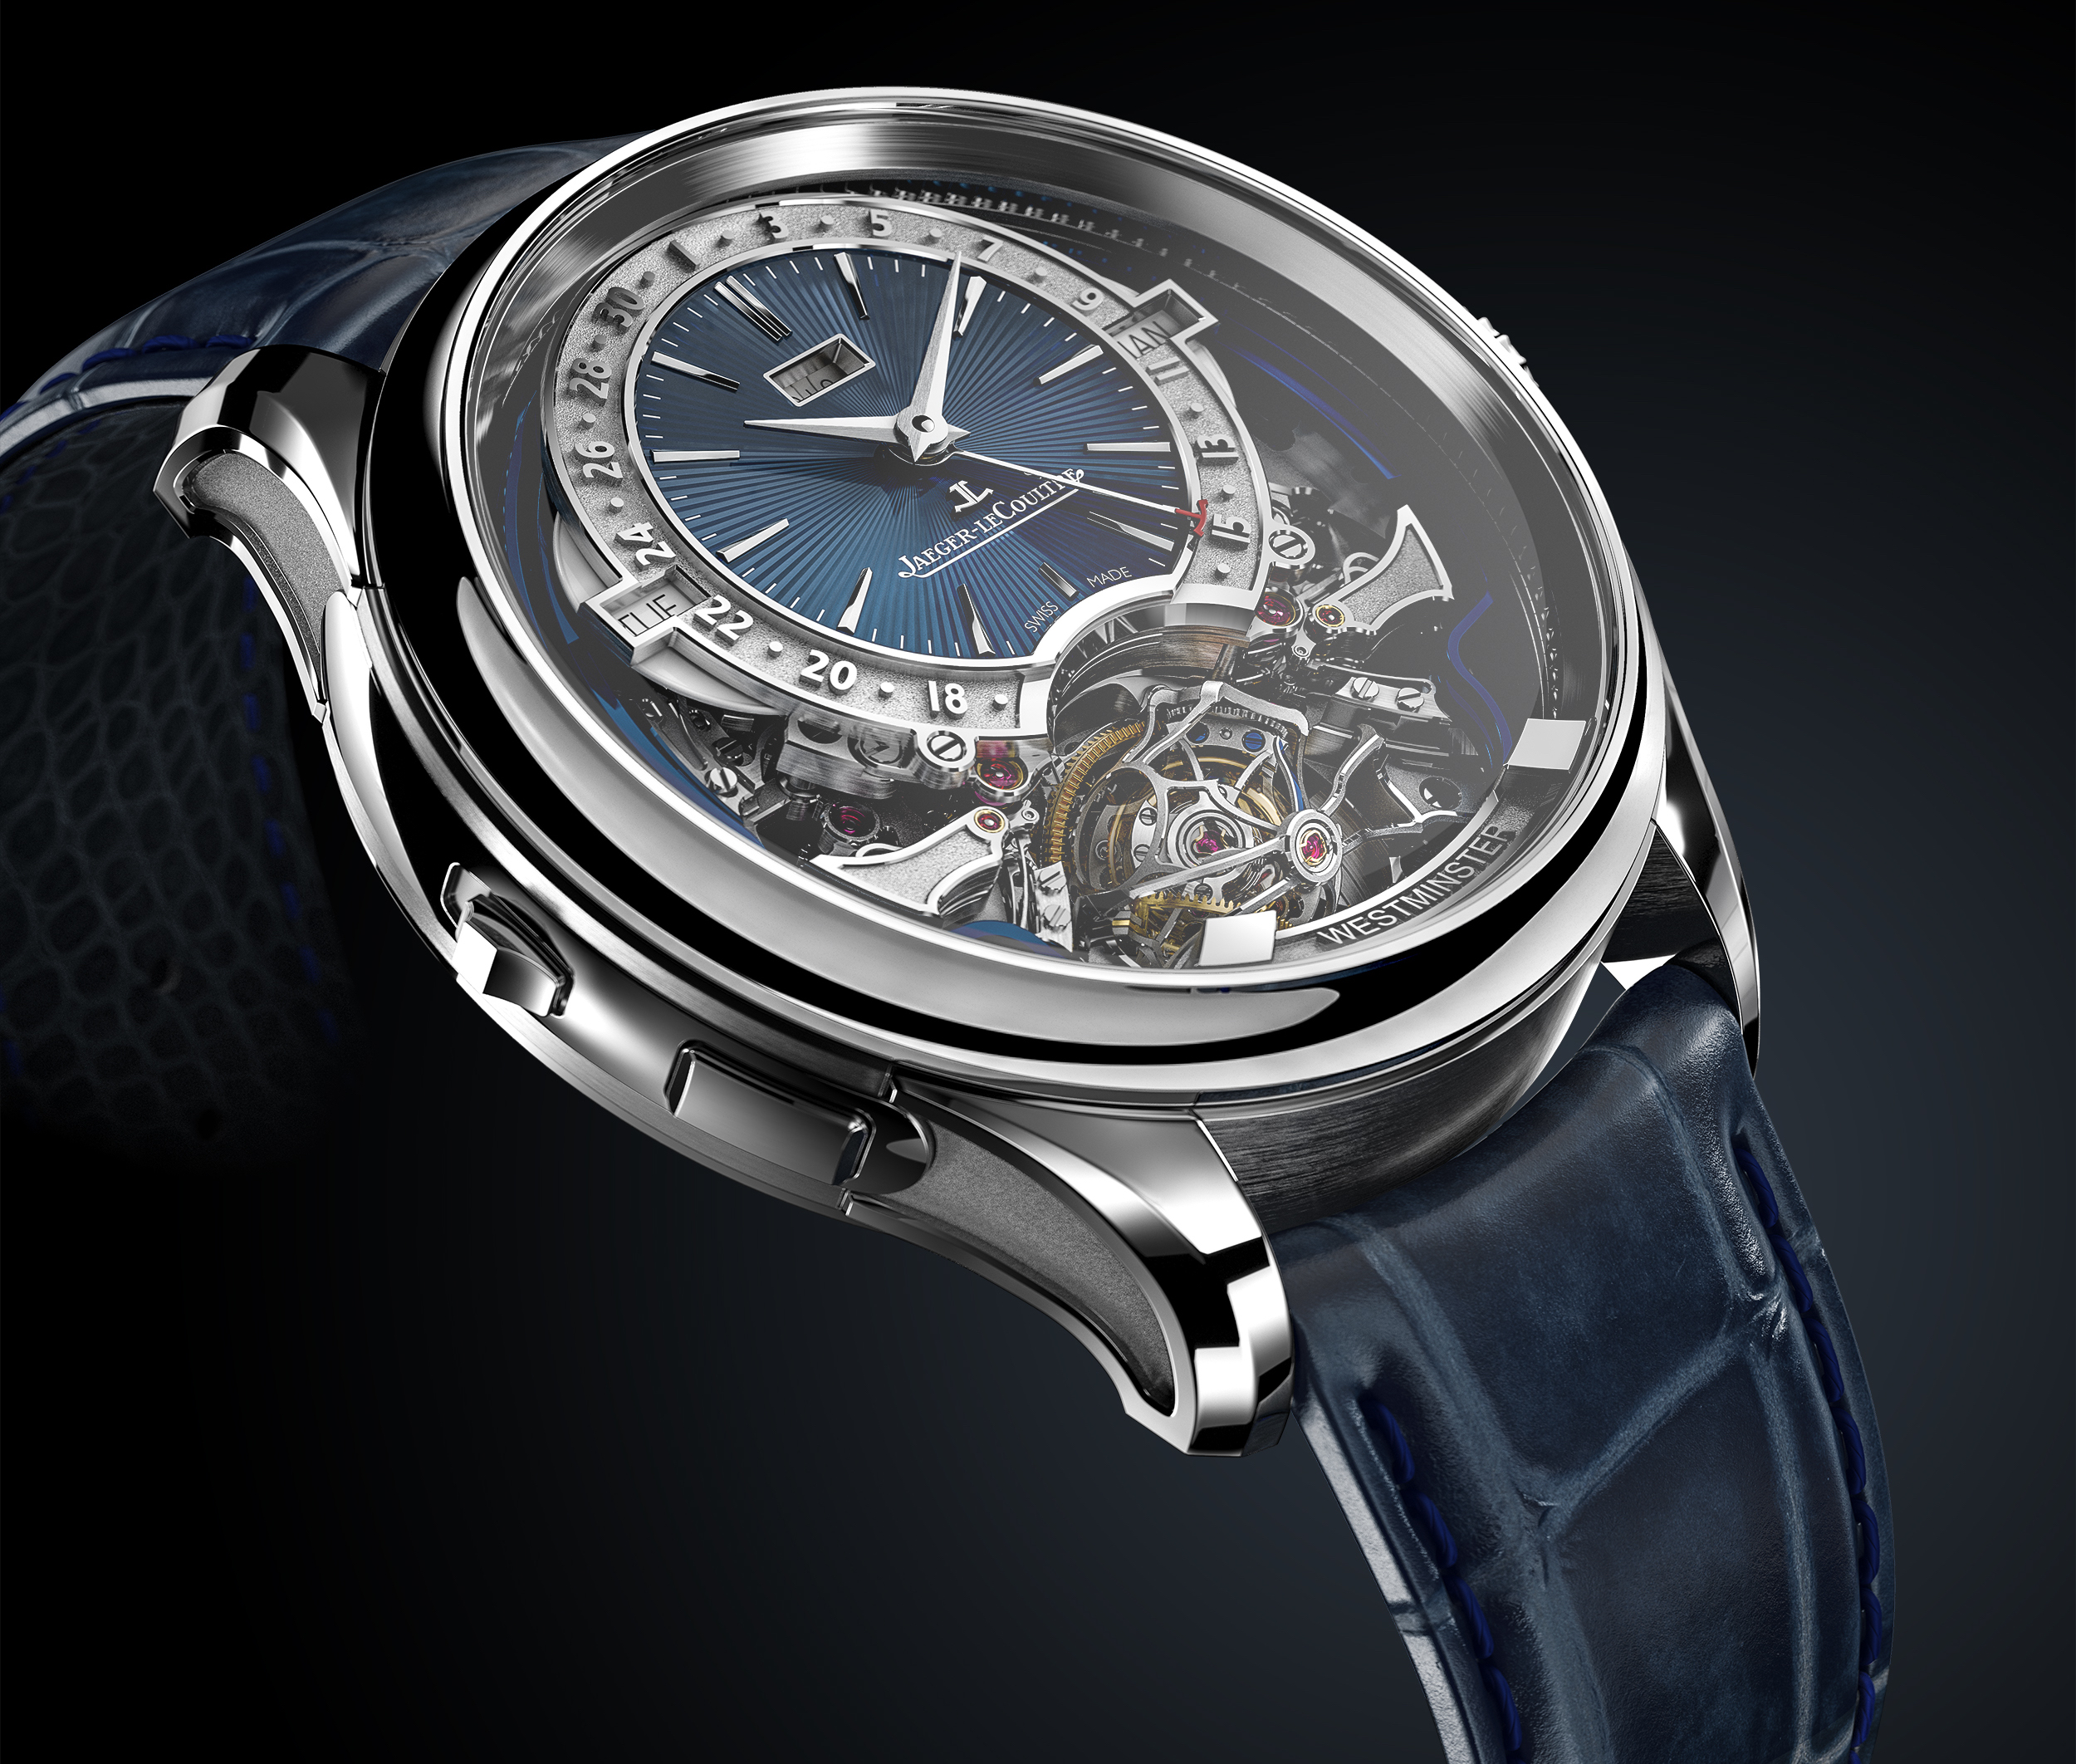 Jaeger-LeCoultre practices the Art of Precision with the new Master Grande Tradition Gyrotourbillion Westminster Perpétuel (SIHH2019)